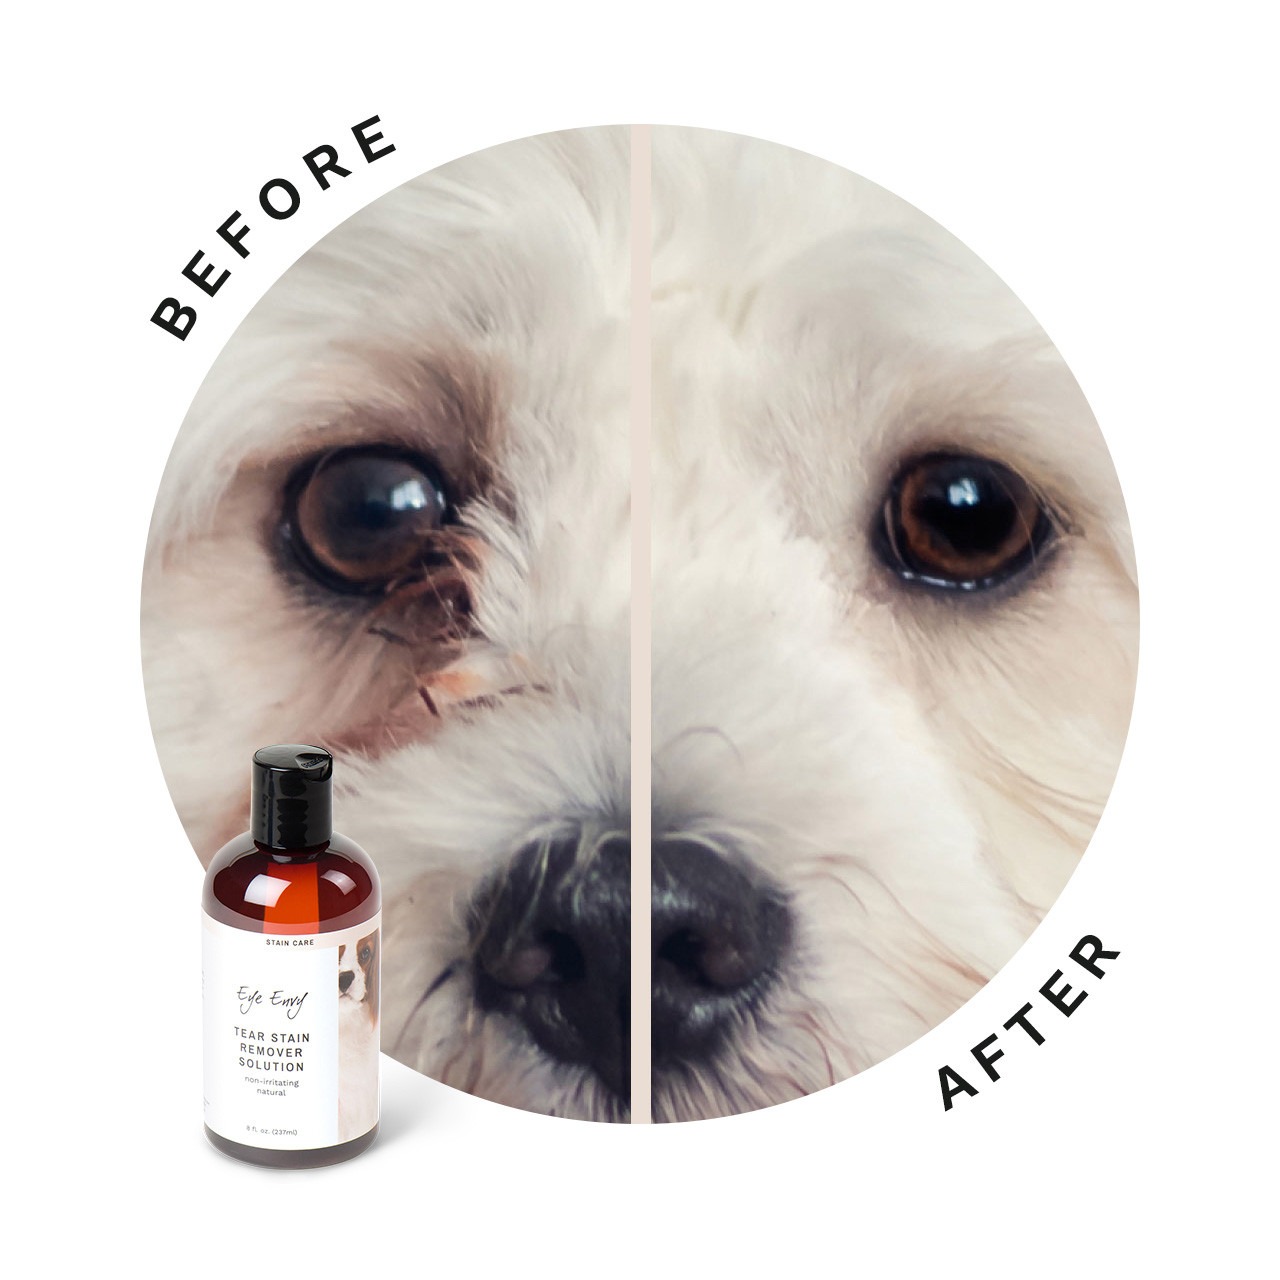 Eye Envy Tear Stain Remover Solution - Dogs 